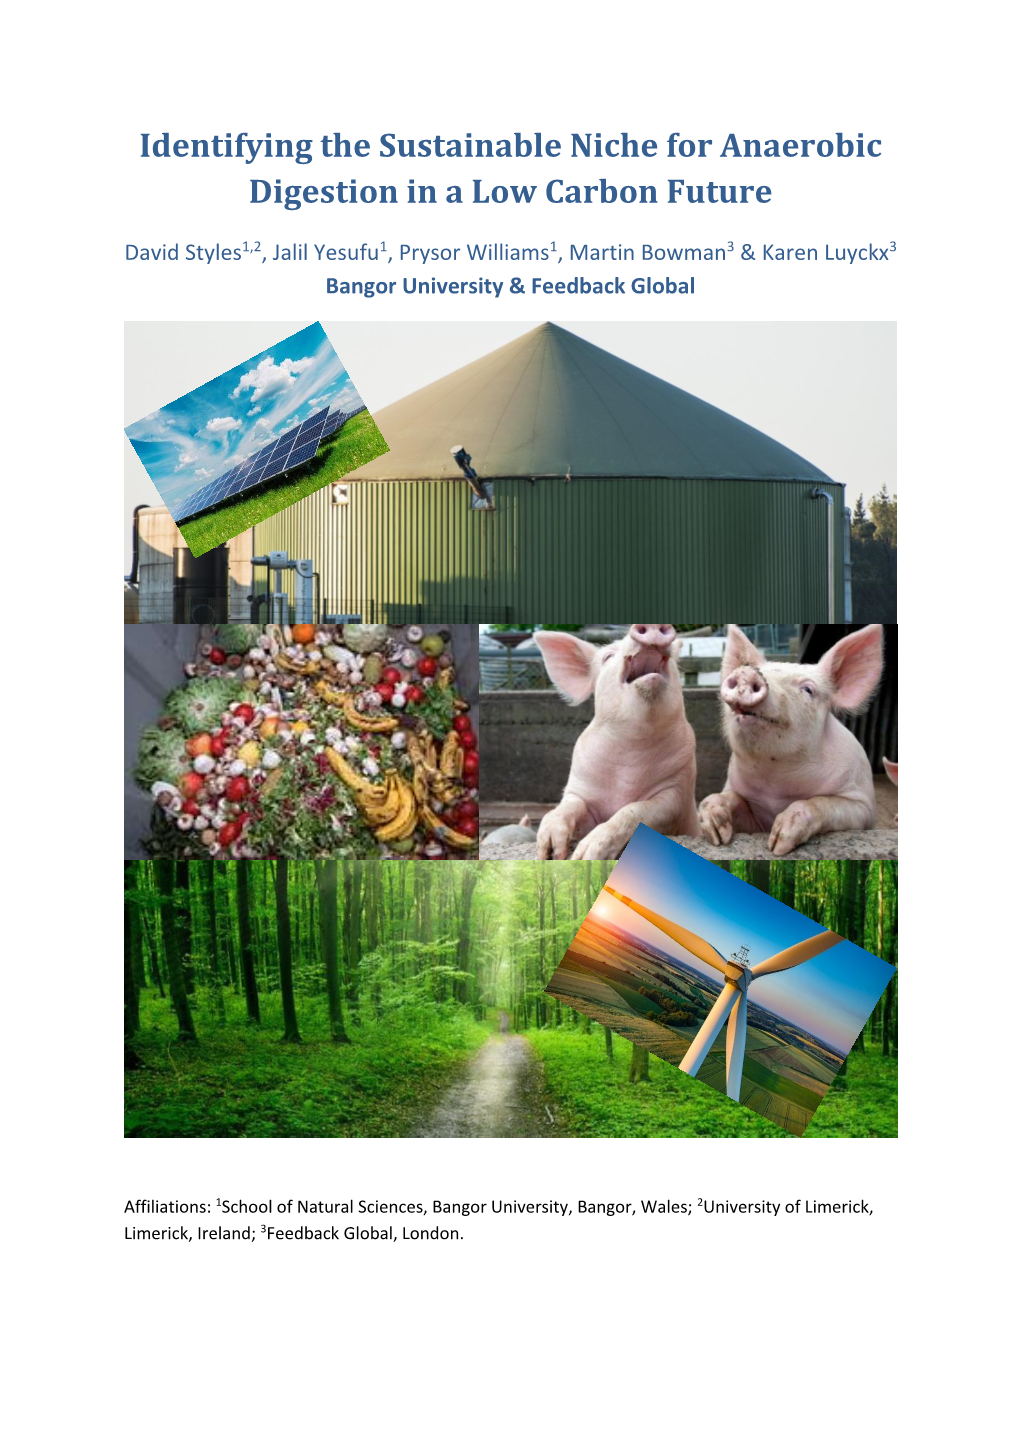 Identifying the Sustainable Niche for Anaerobic Digestion in a Low Carbon Future